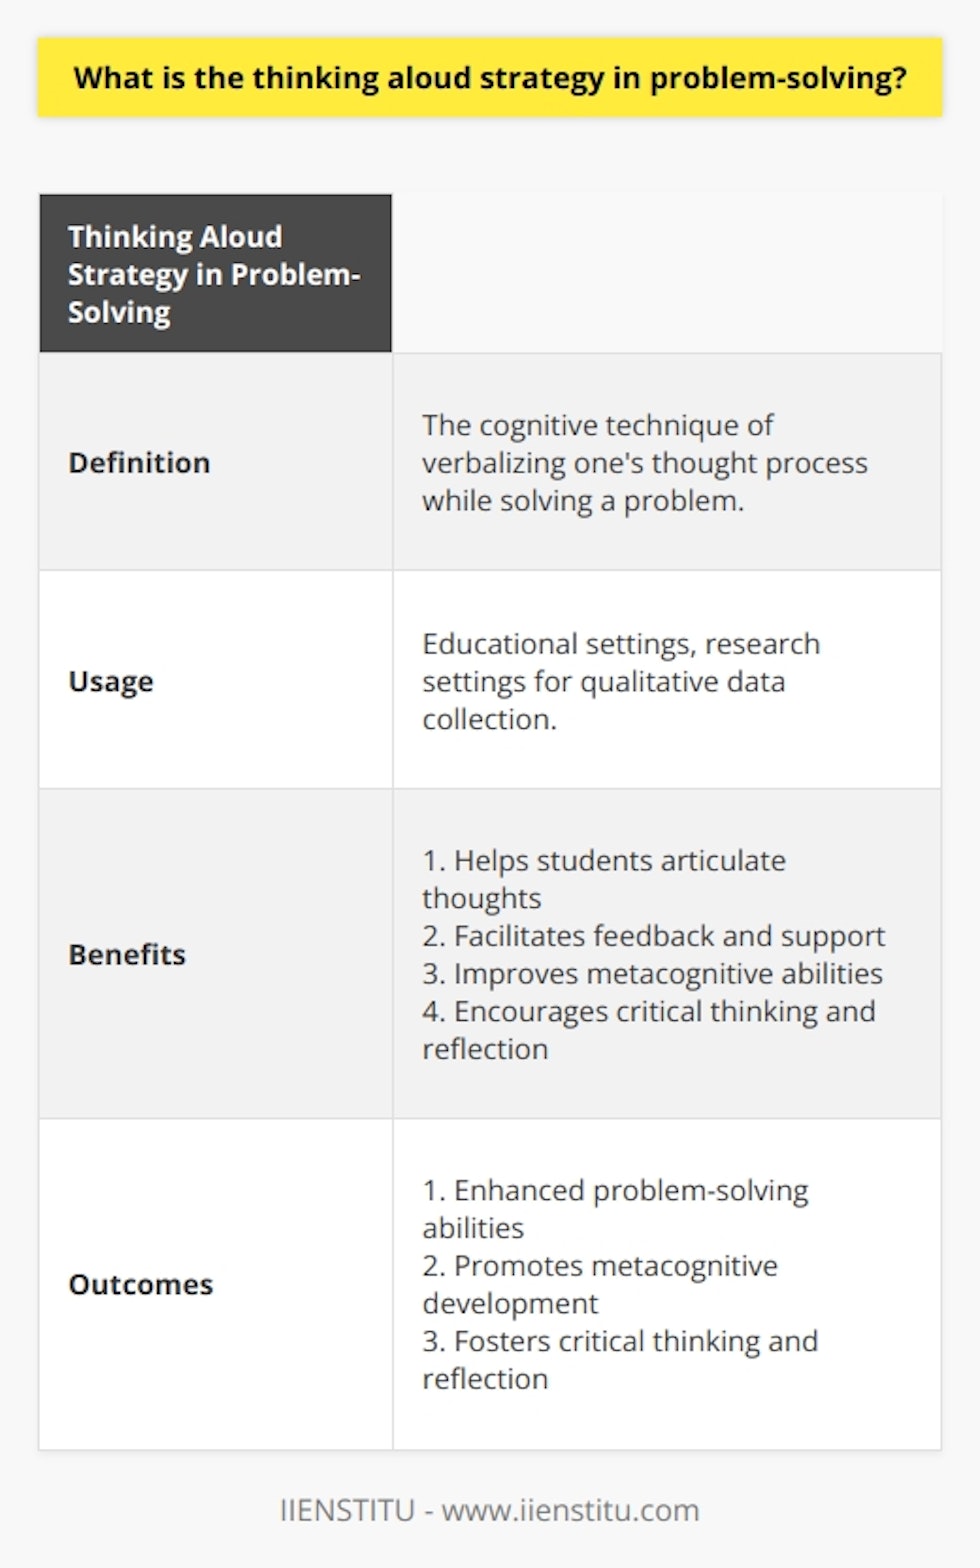 The thinking aloud strategy in problem-solving is a cognitive technique that involves verbalizing one's thought process while attempting to solve a problem. It is often used in educational settings to help students articulate their thoughts and facilitate feedback and support. Additionally, this strategy is used in research settings to gather qualitative data on participants' cognitive processes. By engaging in thinking aloud, individuals can improve their metacognitive abilities, promoting self-awareness, planning, and self-regulation. Furthermore, this technique encourages critical thinking and reflection, helping individuals evaluate the validity and soundness of their reasoning. Overall, the thinking aloud strategy is a valuable tool for enhancing problem-solving abilities, fostering metacognitive development, and promoting critical thinking and reflection.